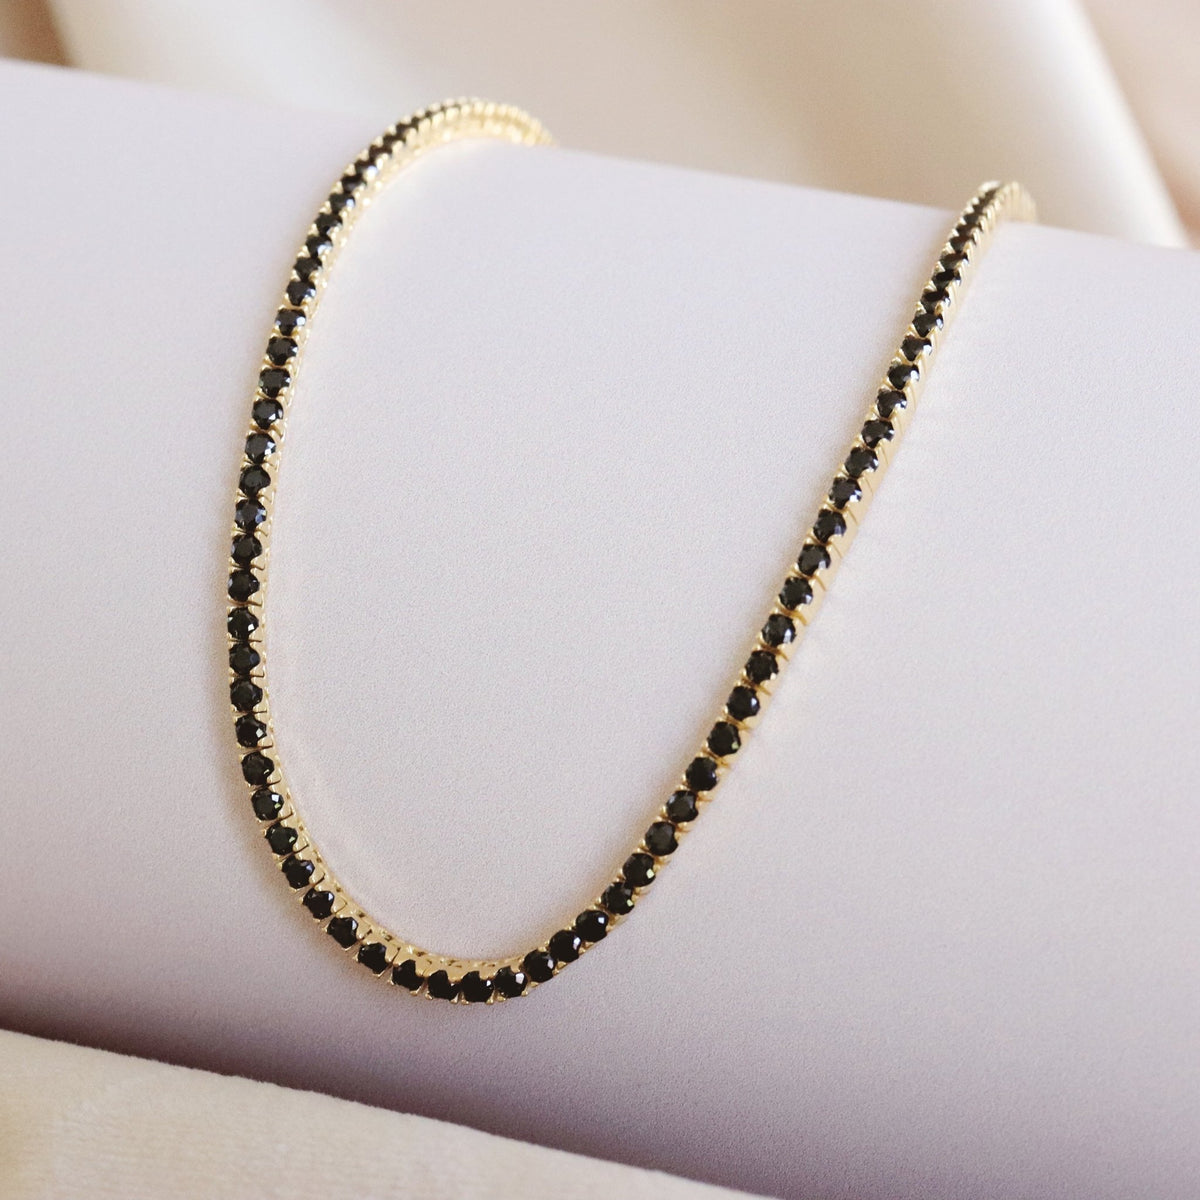 LOVE TENNIS NECKLACE - BLACK CUBIC ZIRCONIA &amp; GOLD - SO PRETTY CARA COTTER